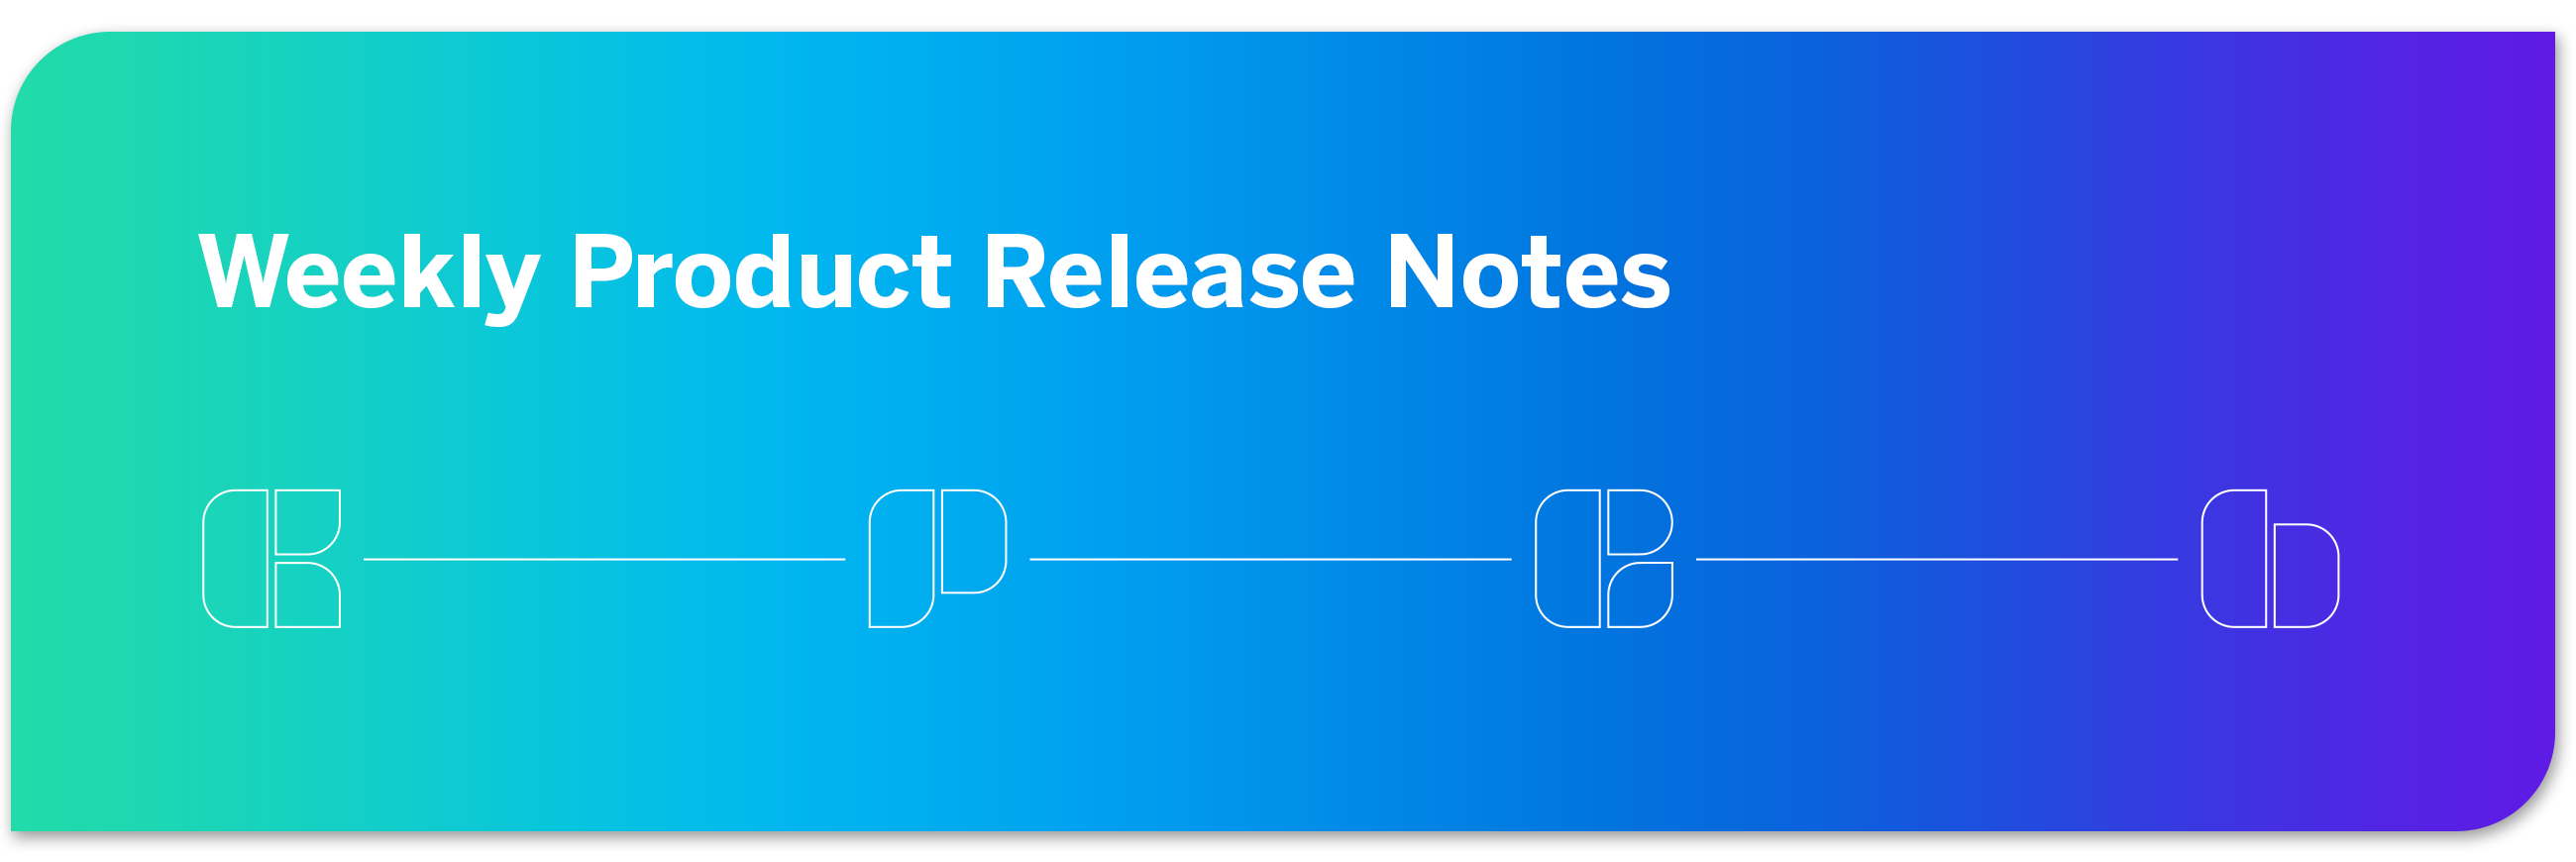 Weekly Product Release Notes